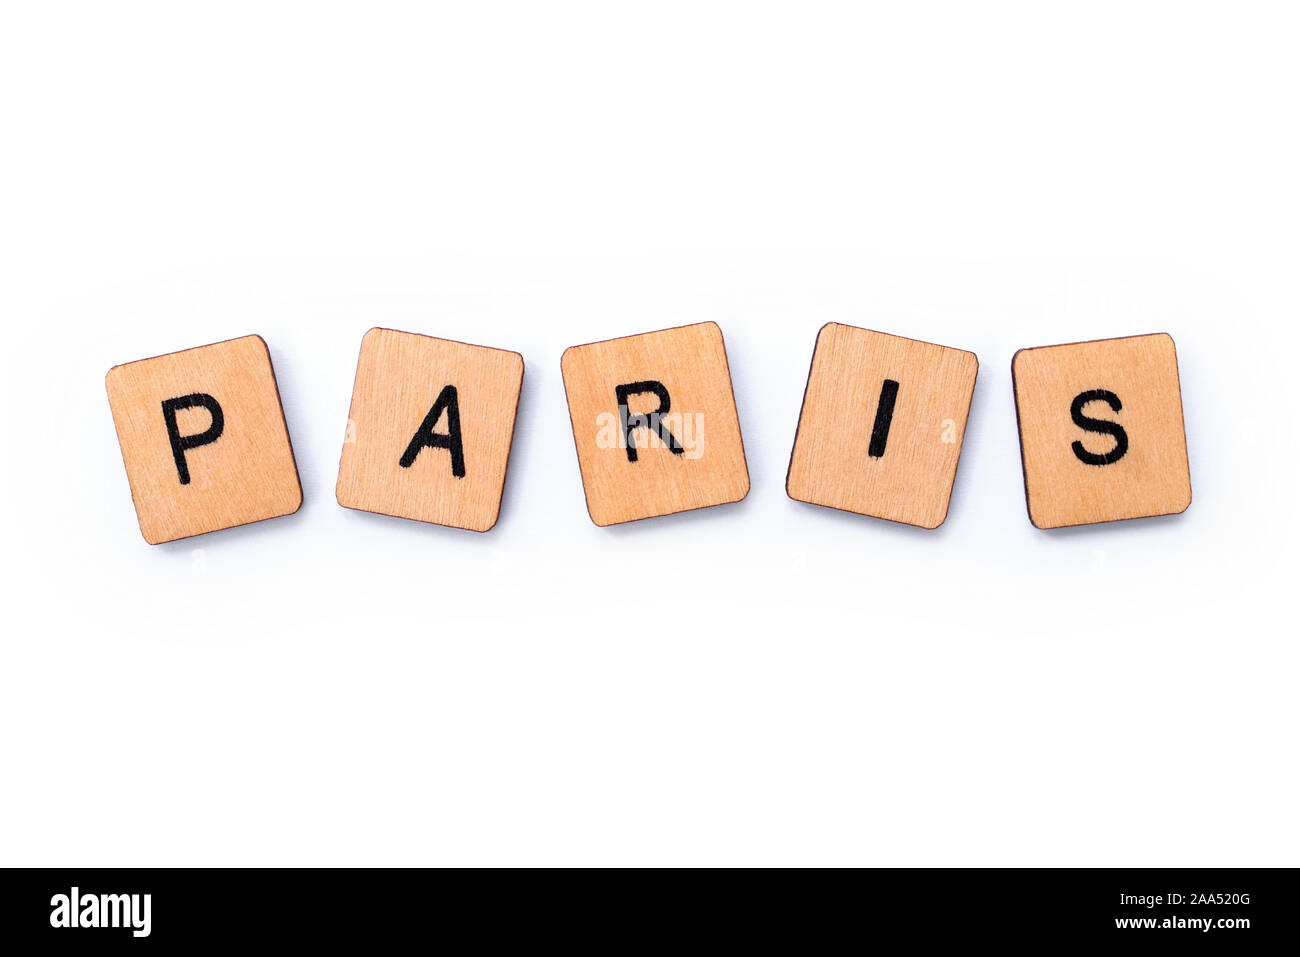 The word PARIS, spelt with wooden letter tiles over a white background. Stock Photo